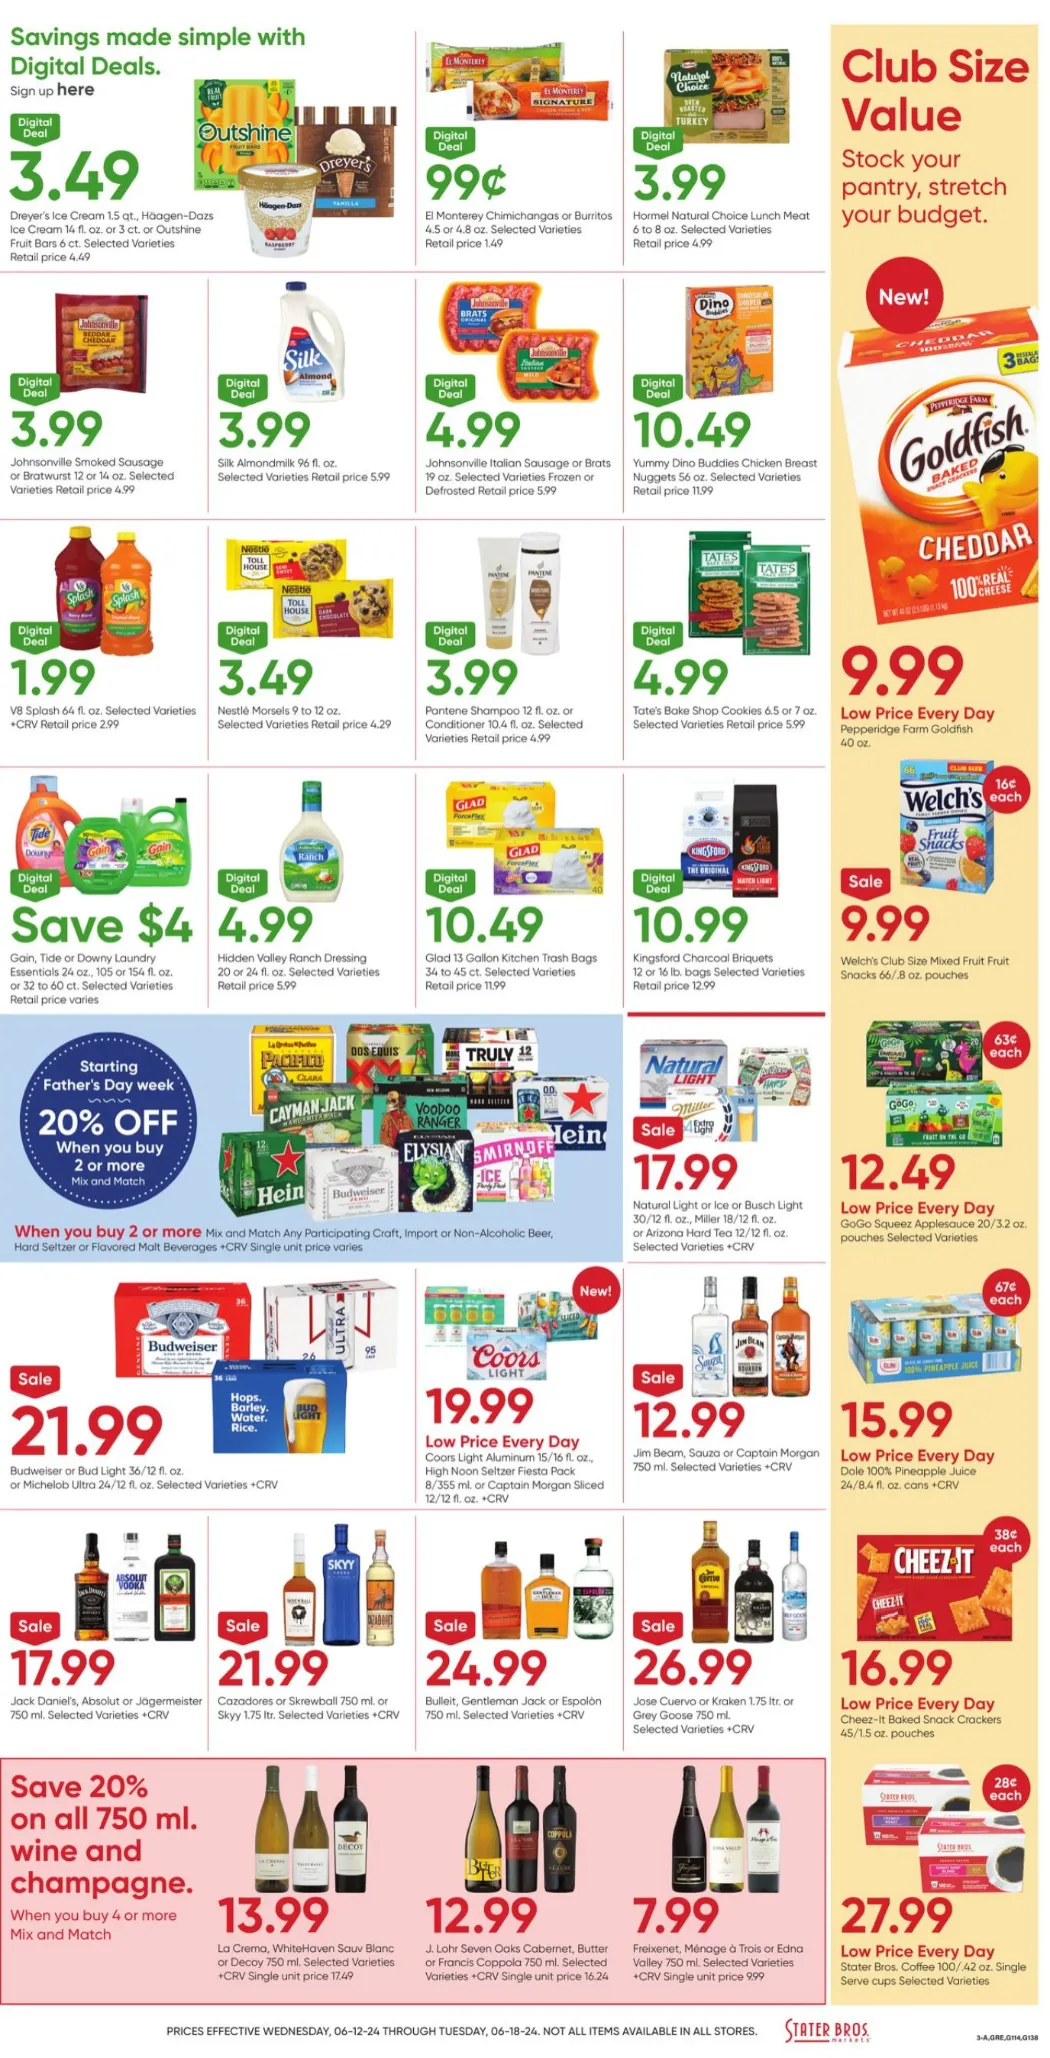 Stater Bros Weekly Ad July 2024 Weekly Sales, Deals, Discounts and Digital Coupons.